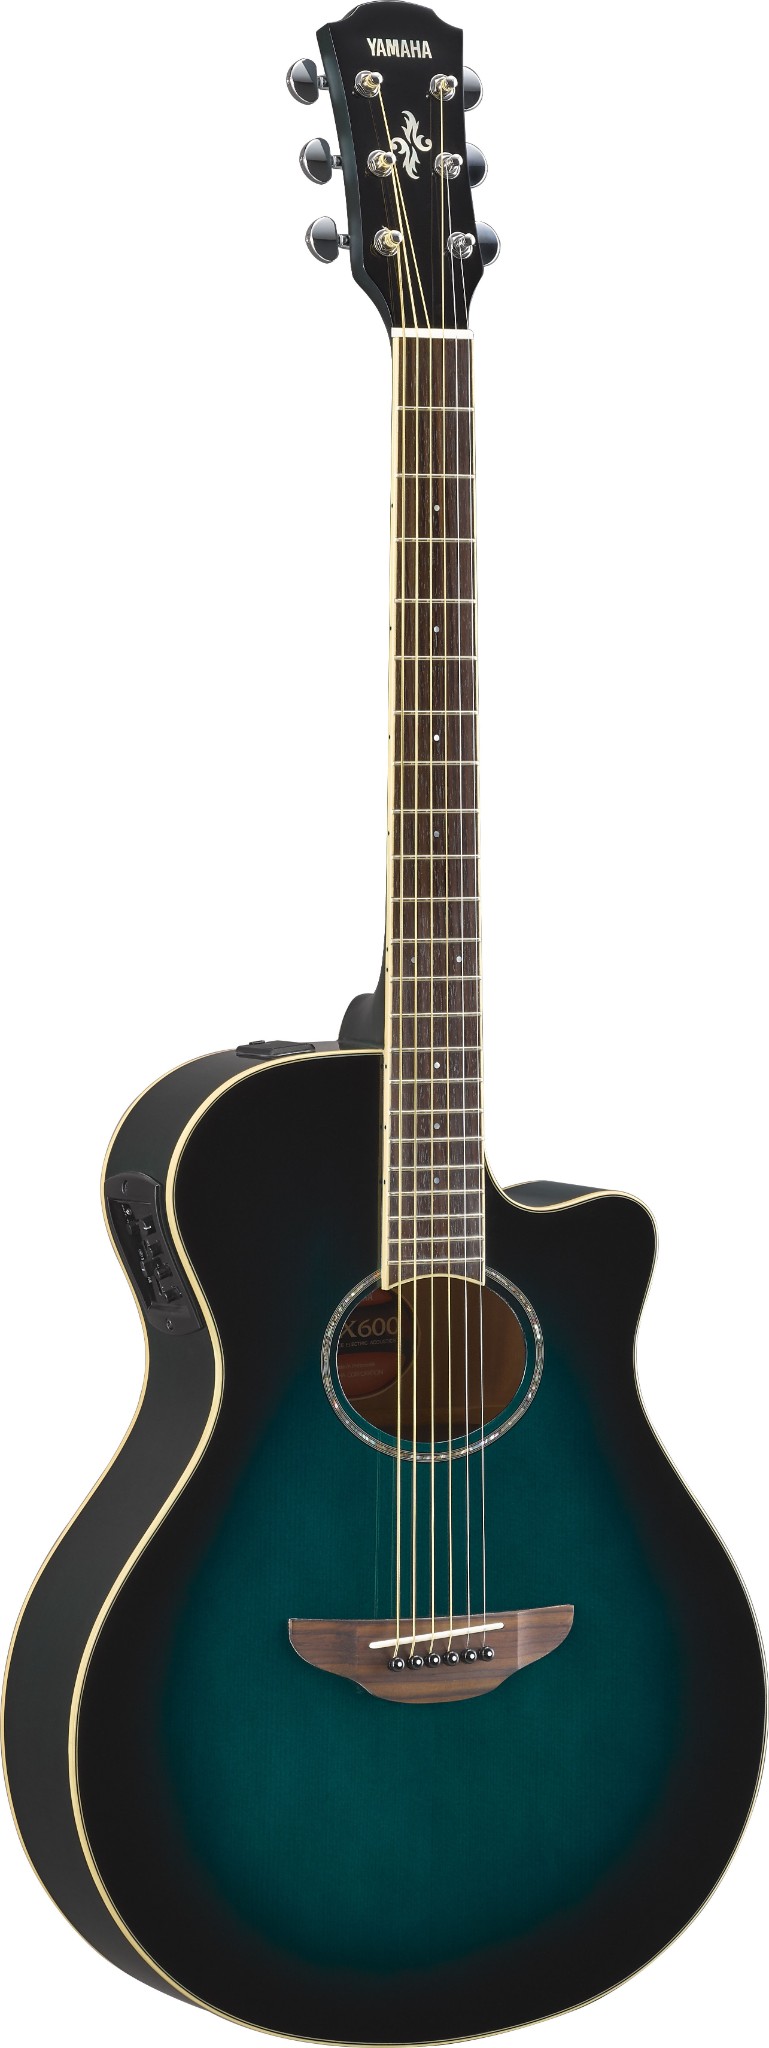 Yamaha APX600 Acoustic Electric Guitar  …